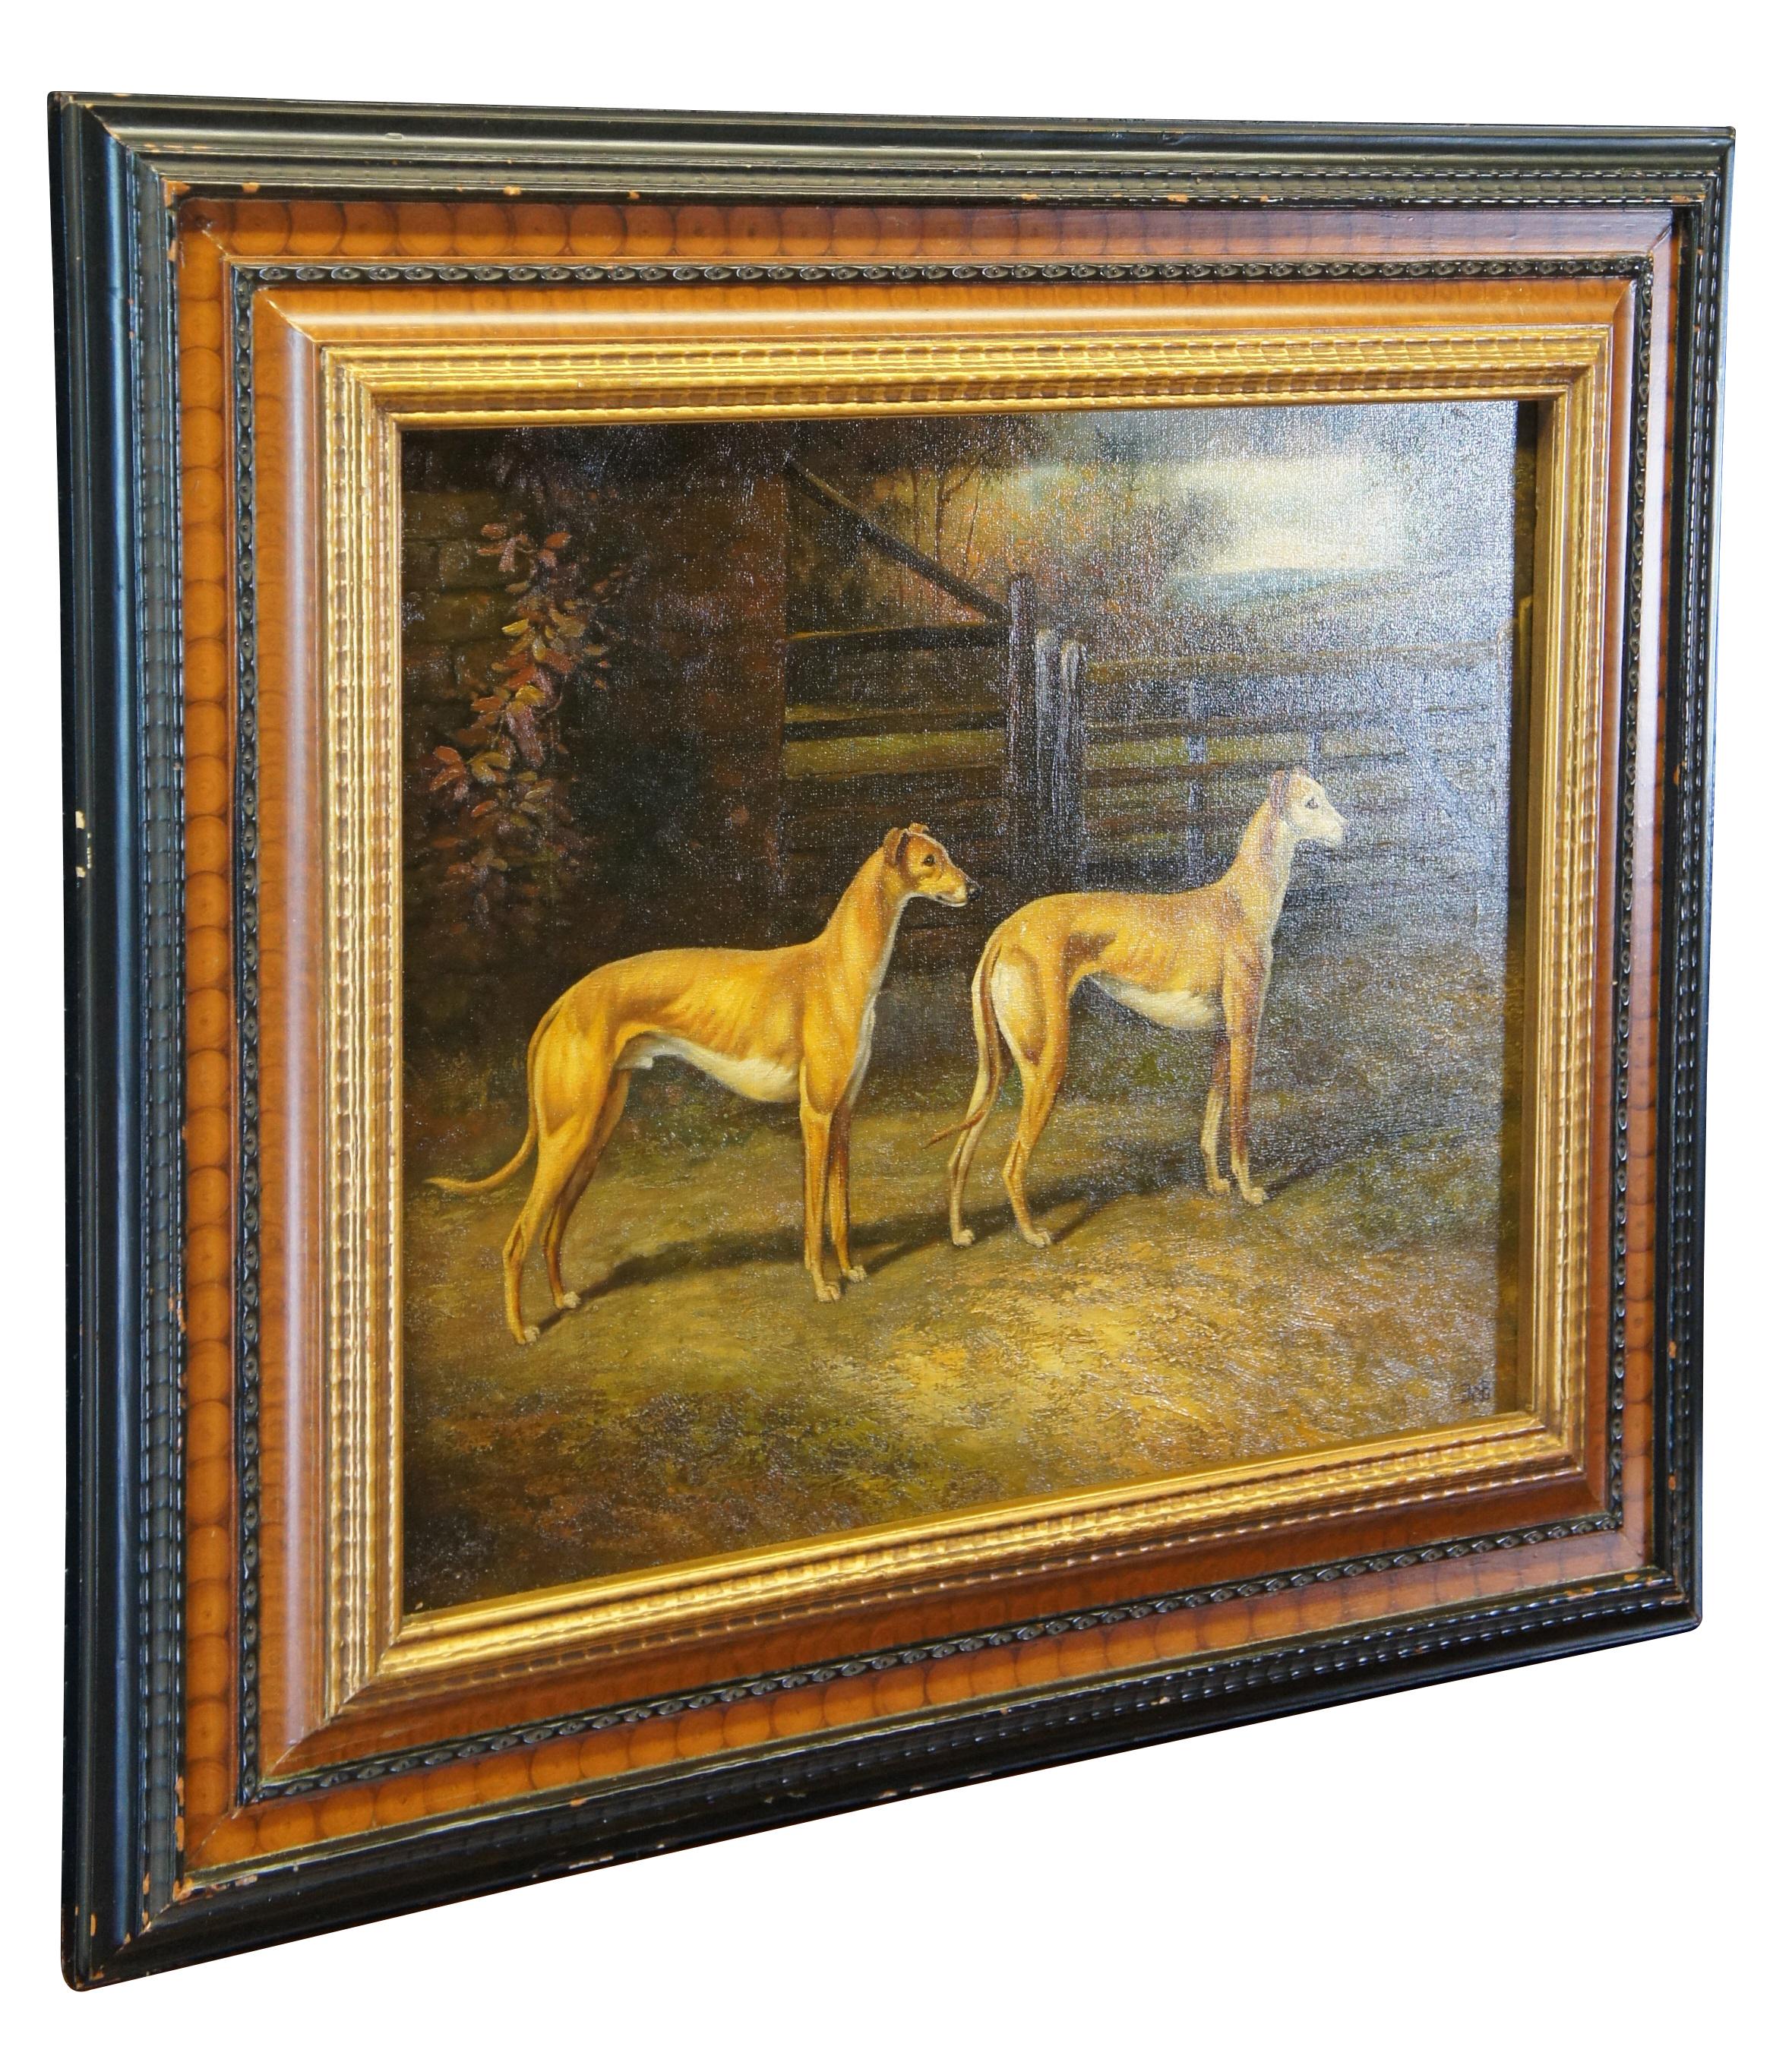 Late 20th century painting titled Fellow from Wales and Silvery Sand, After Heywood Hardy.  Features two Greyhounds set within a country landscape with a fence and trees in the background.  Signed BOB lower right. Framed in ornate